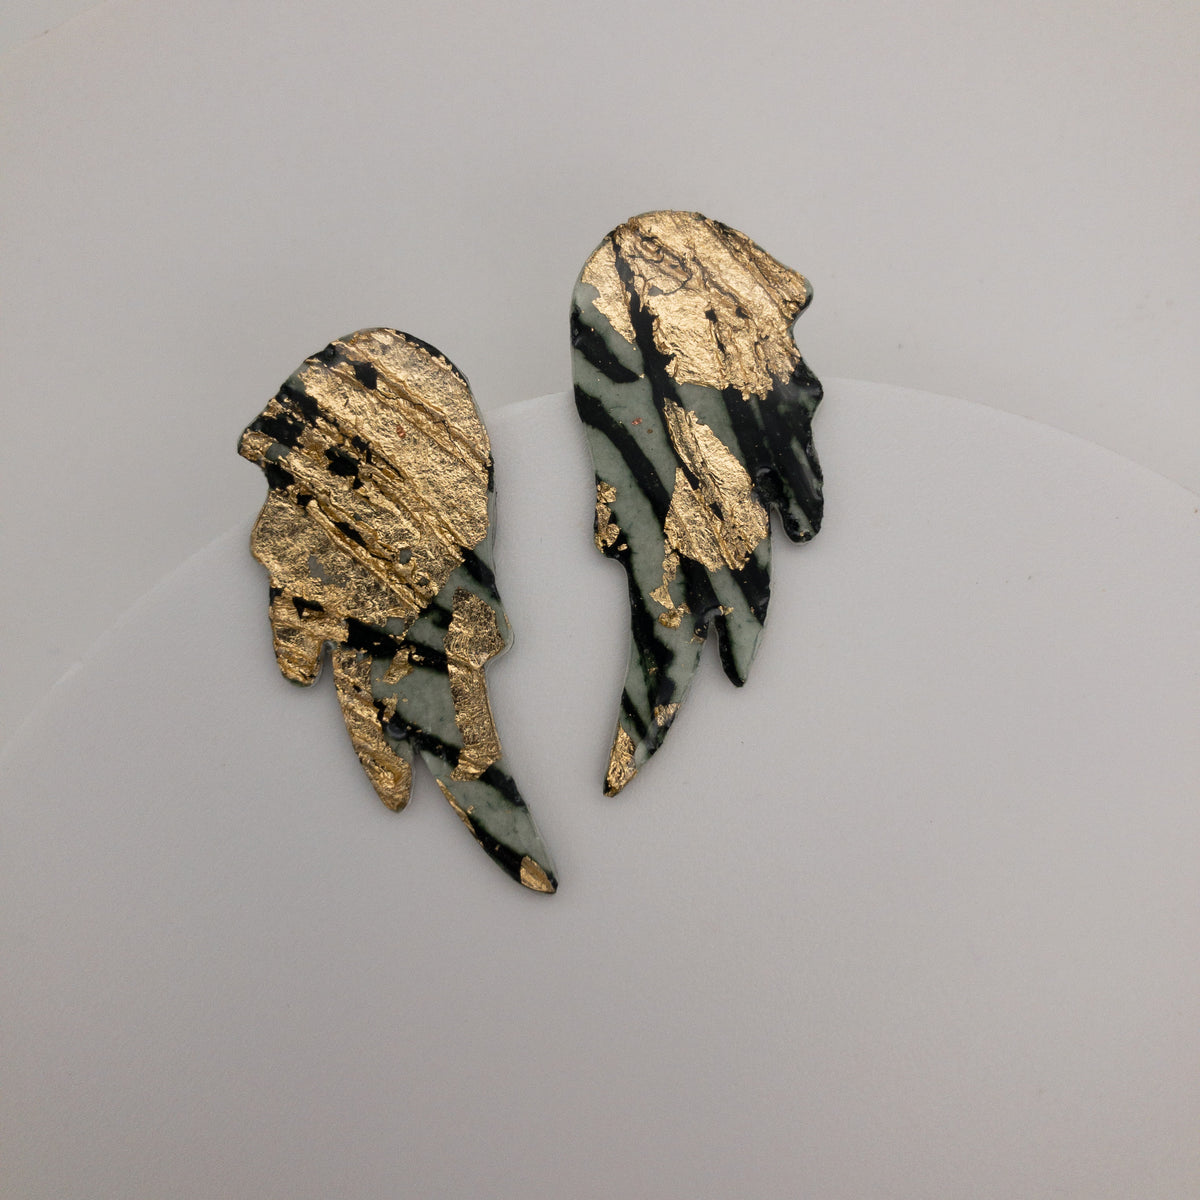 Wings of Desire sgraffito earrings in gold/forest green